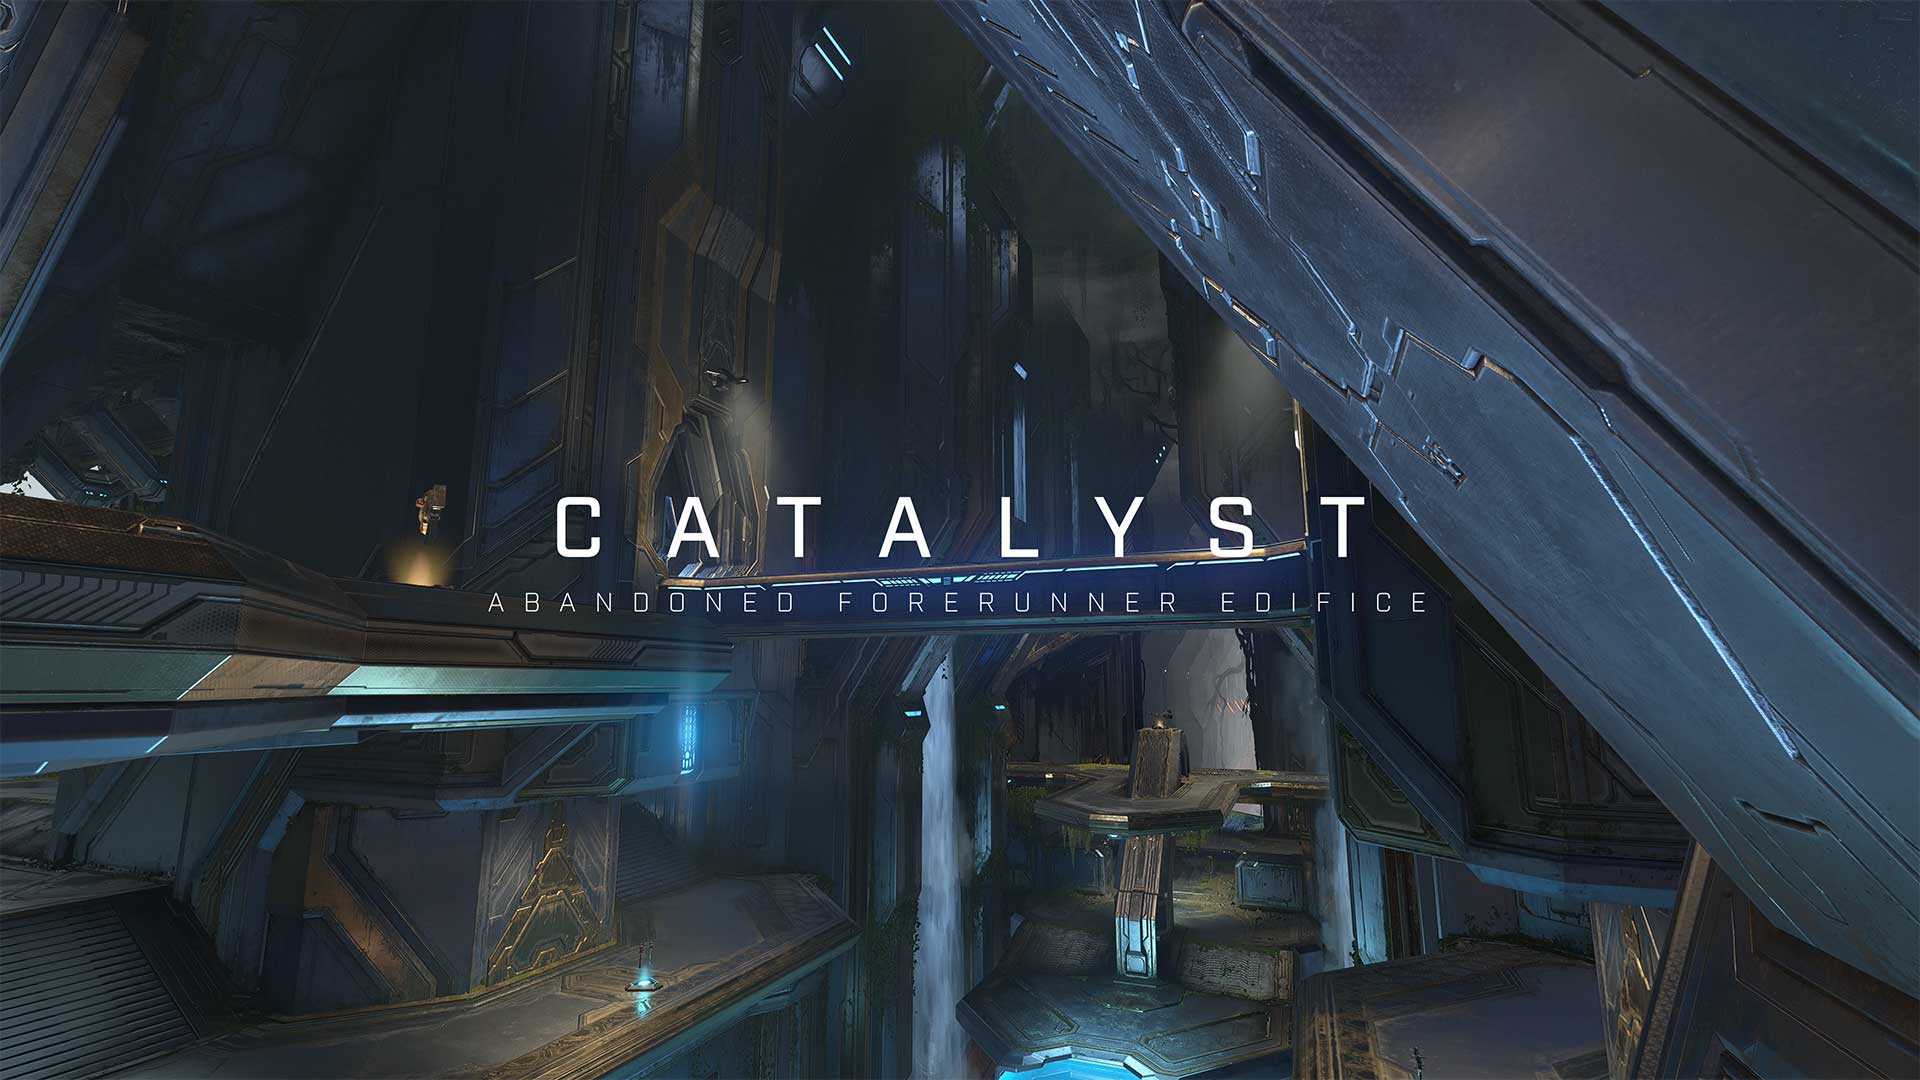 Arena Map, Catalyst with the description across the middle that reads: Abandoned Forerunner Edifice.